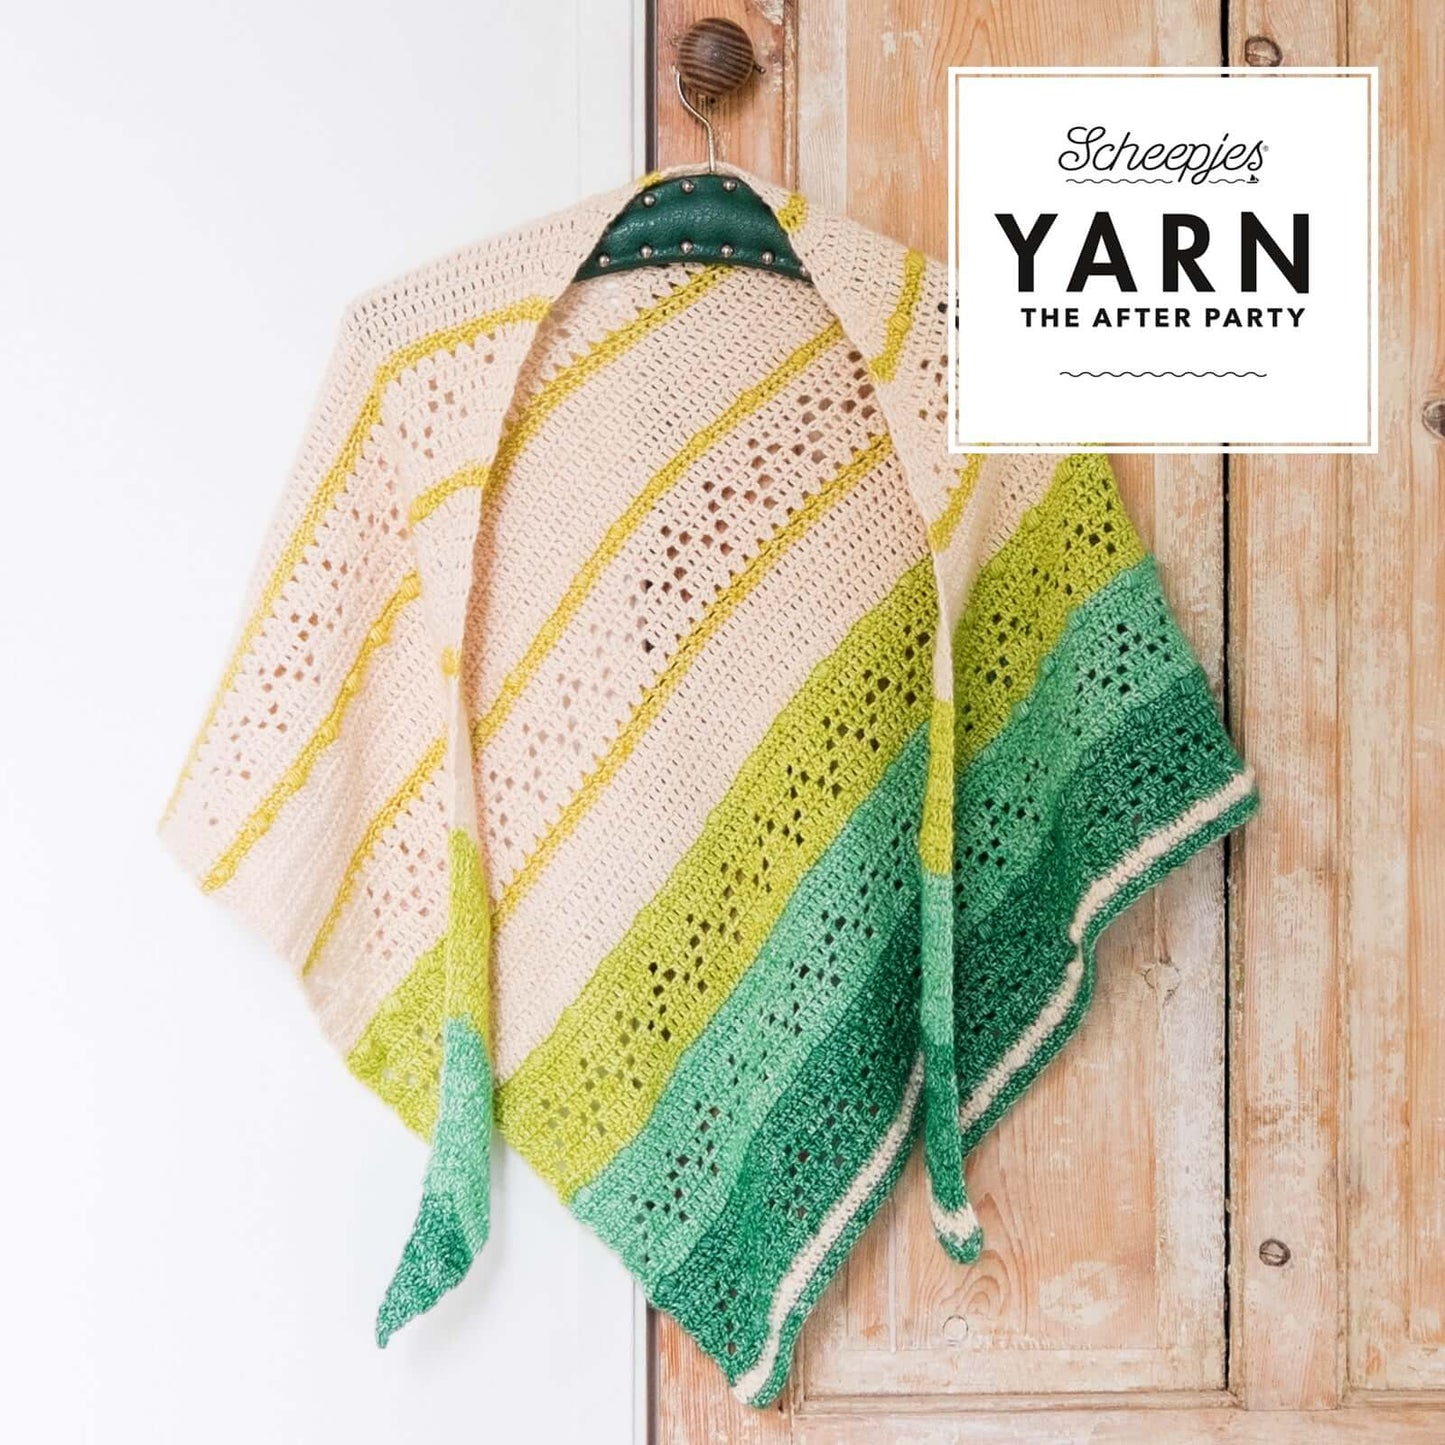 Scheepjes Yarn The After Party no. 23 - Forest Valley Shawl (booklet) - (Crochet)